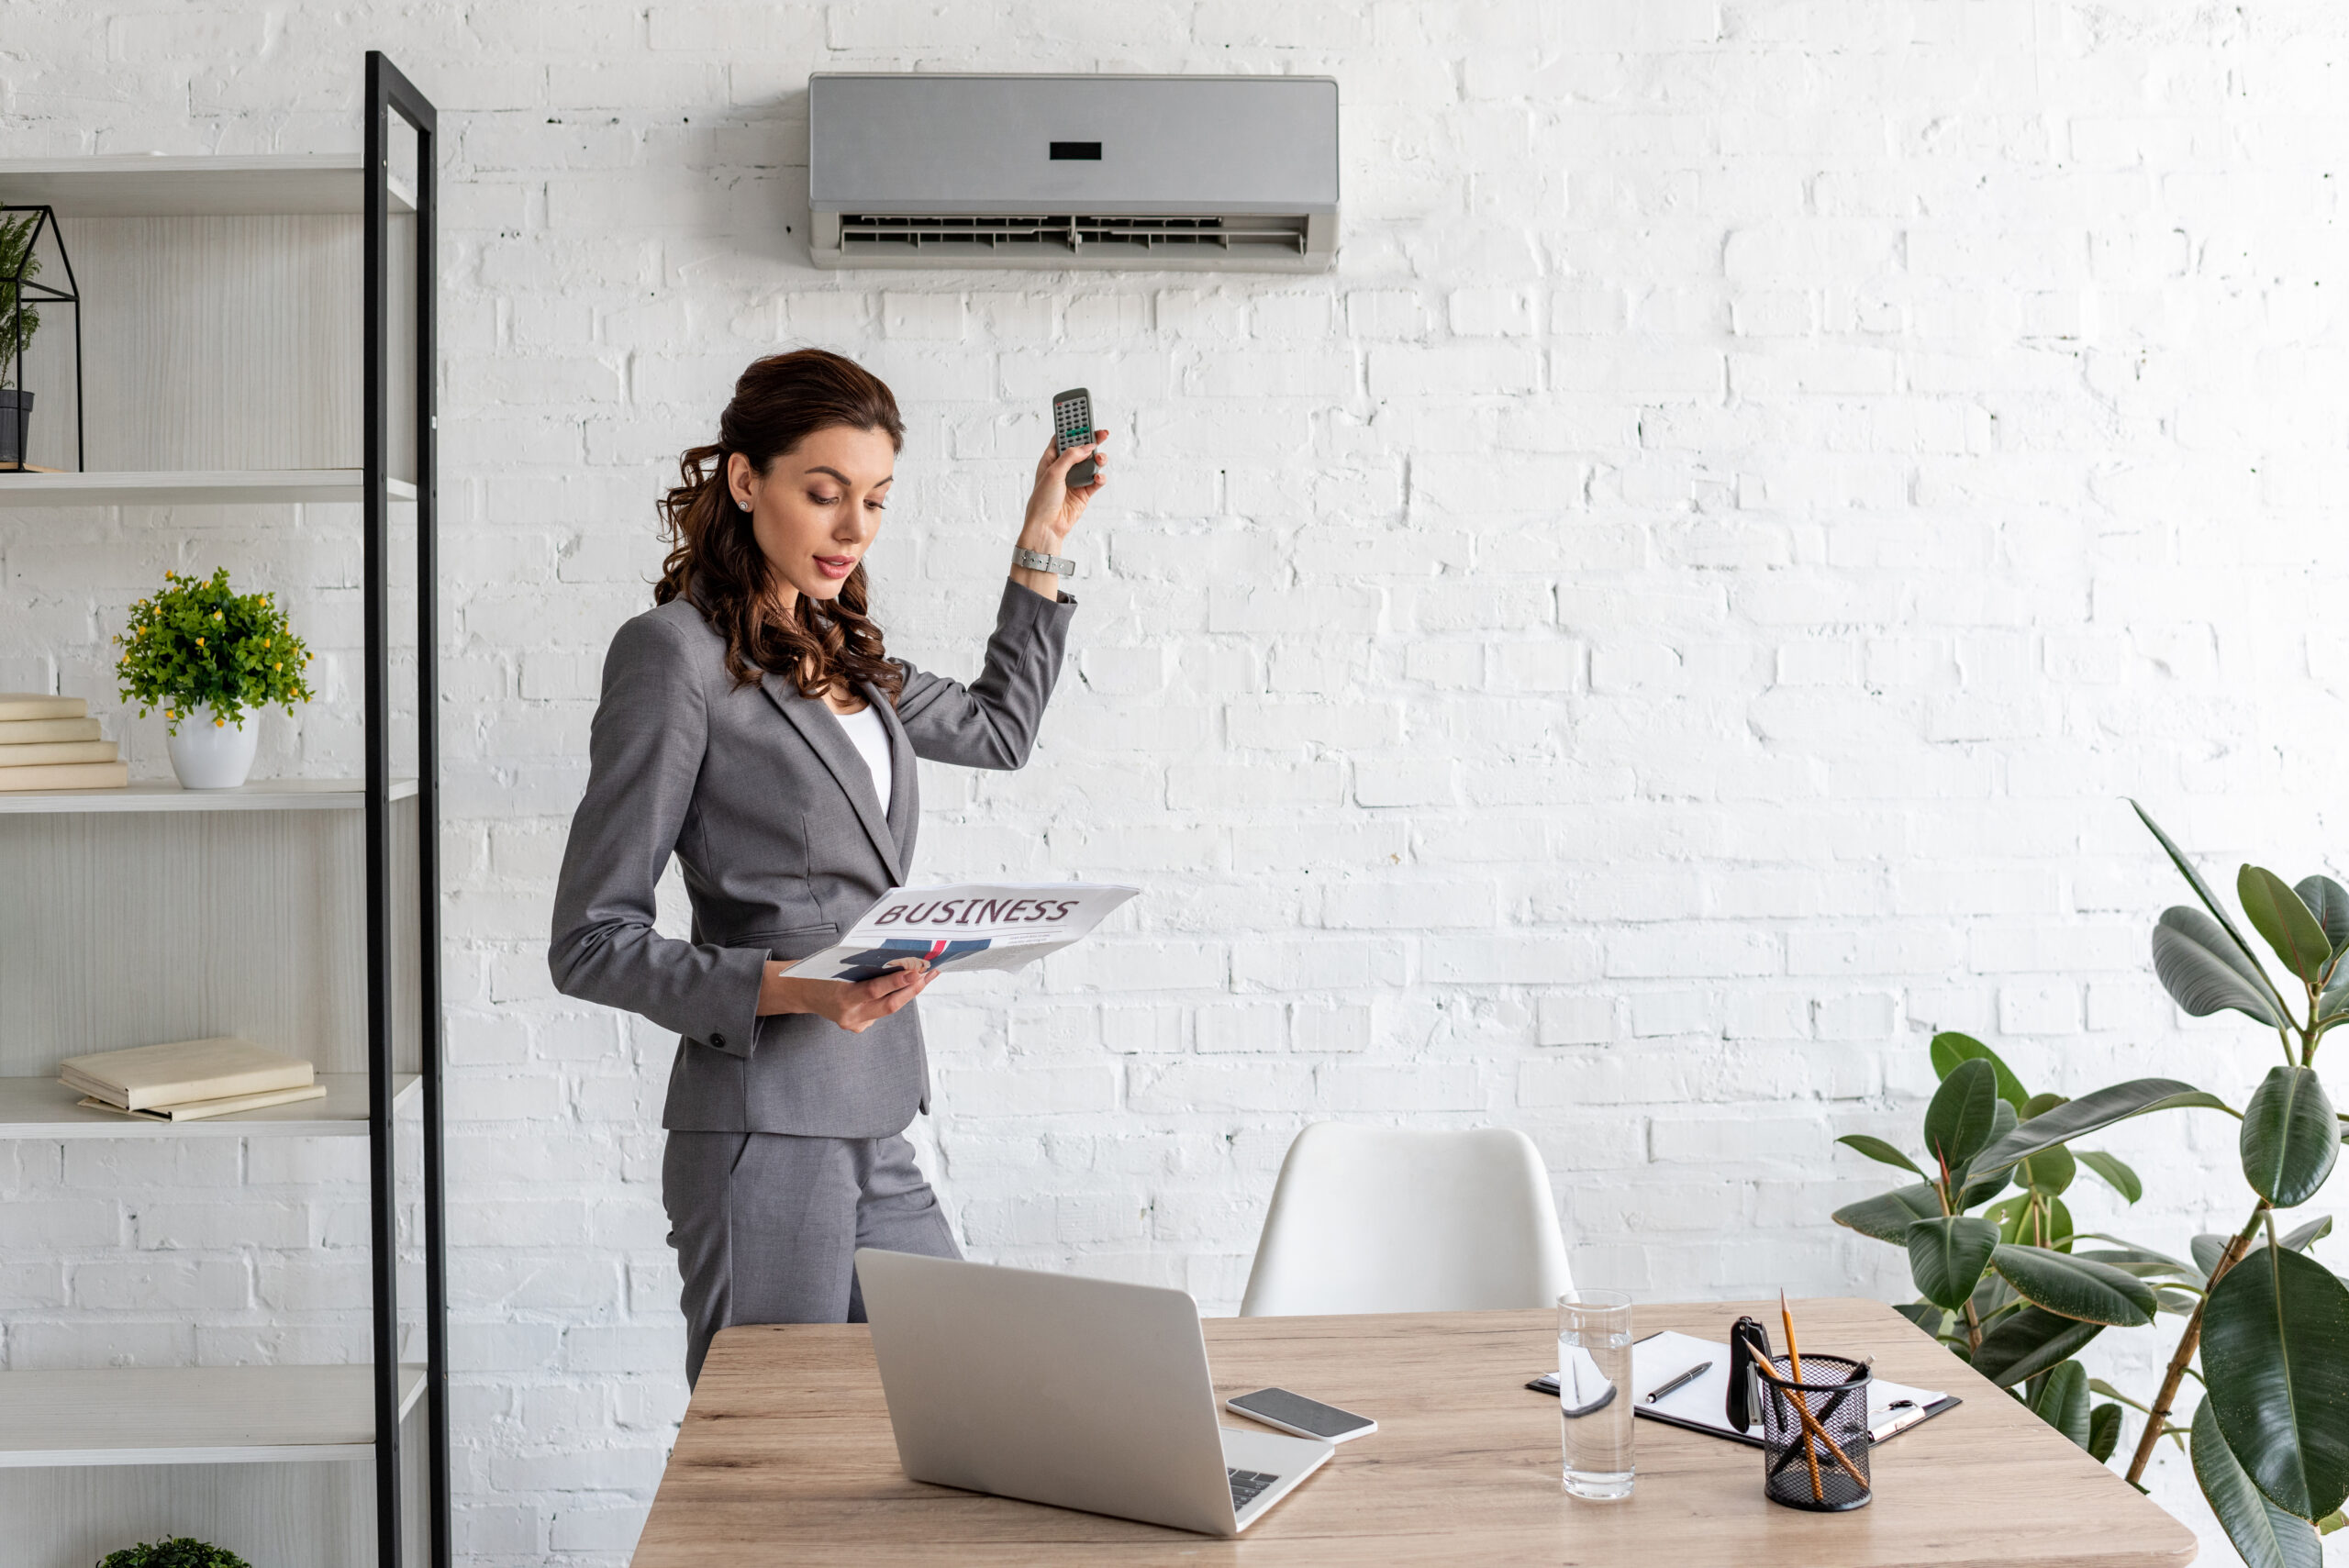 beautiful businesswoman reading business newspaper while standing under air conditioner with remote